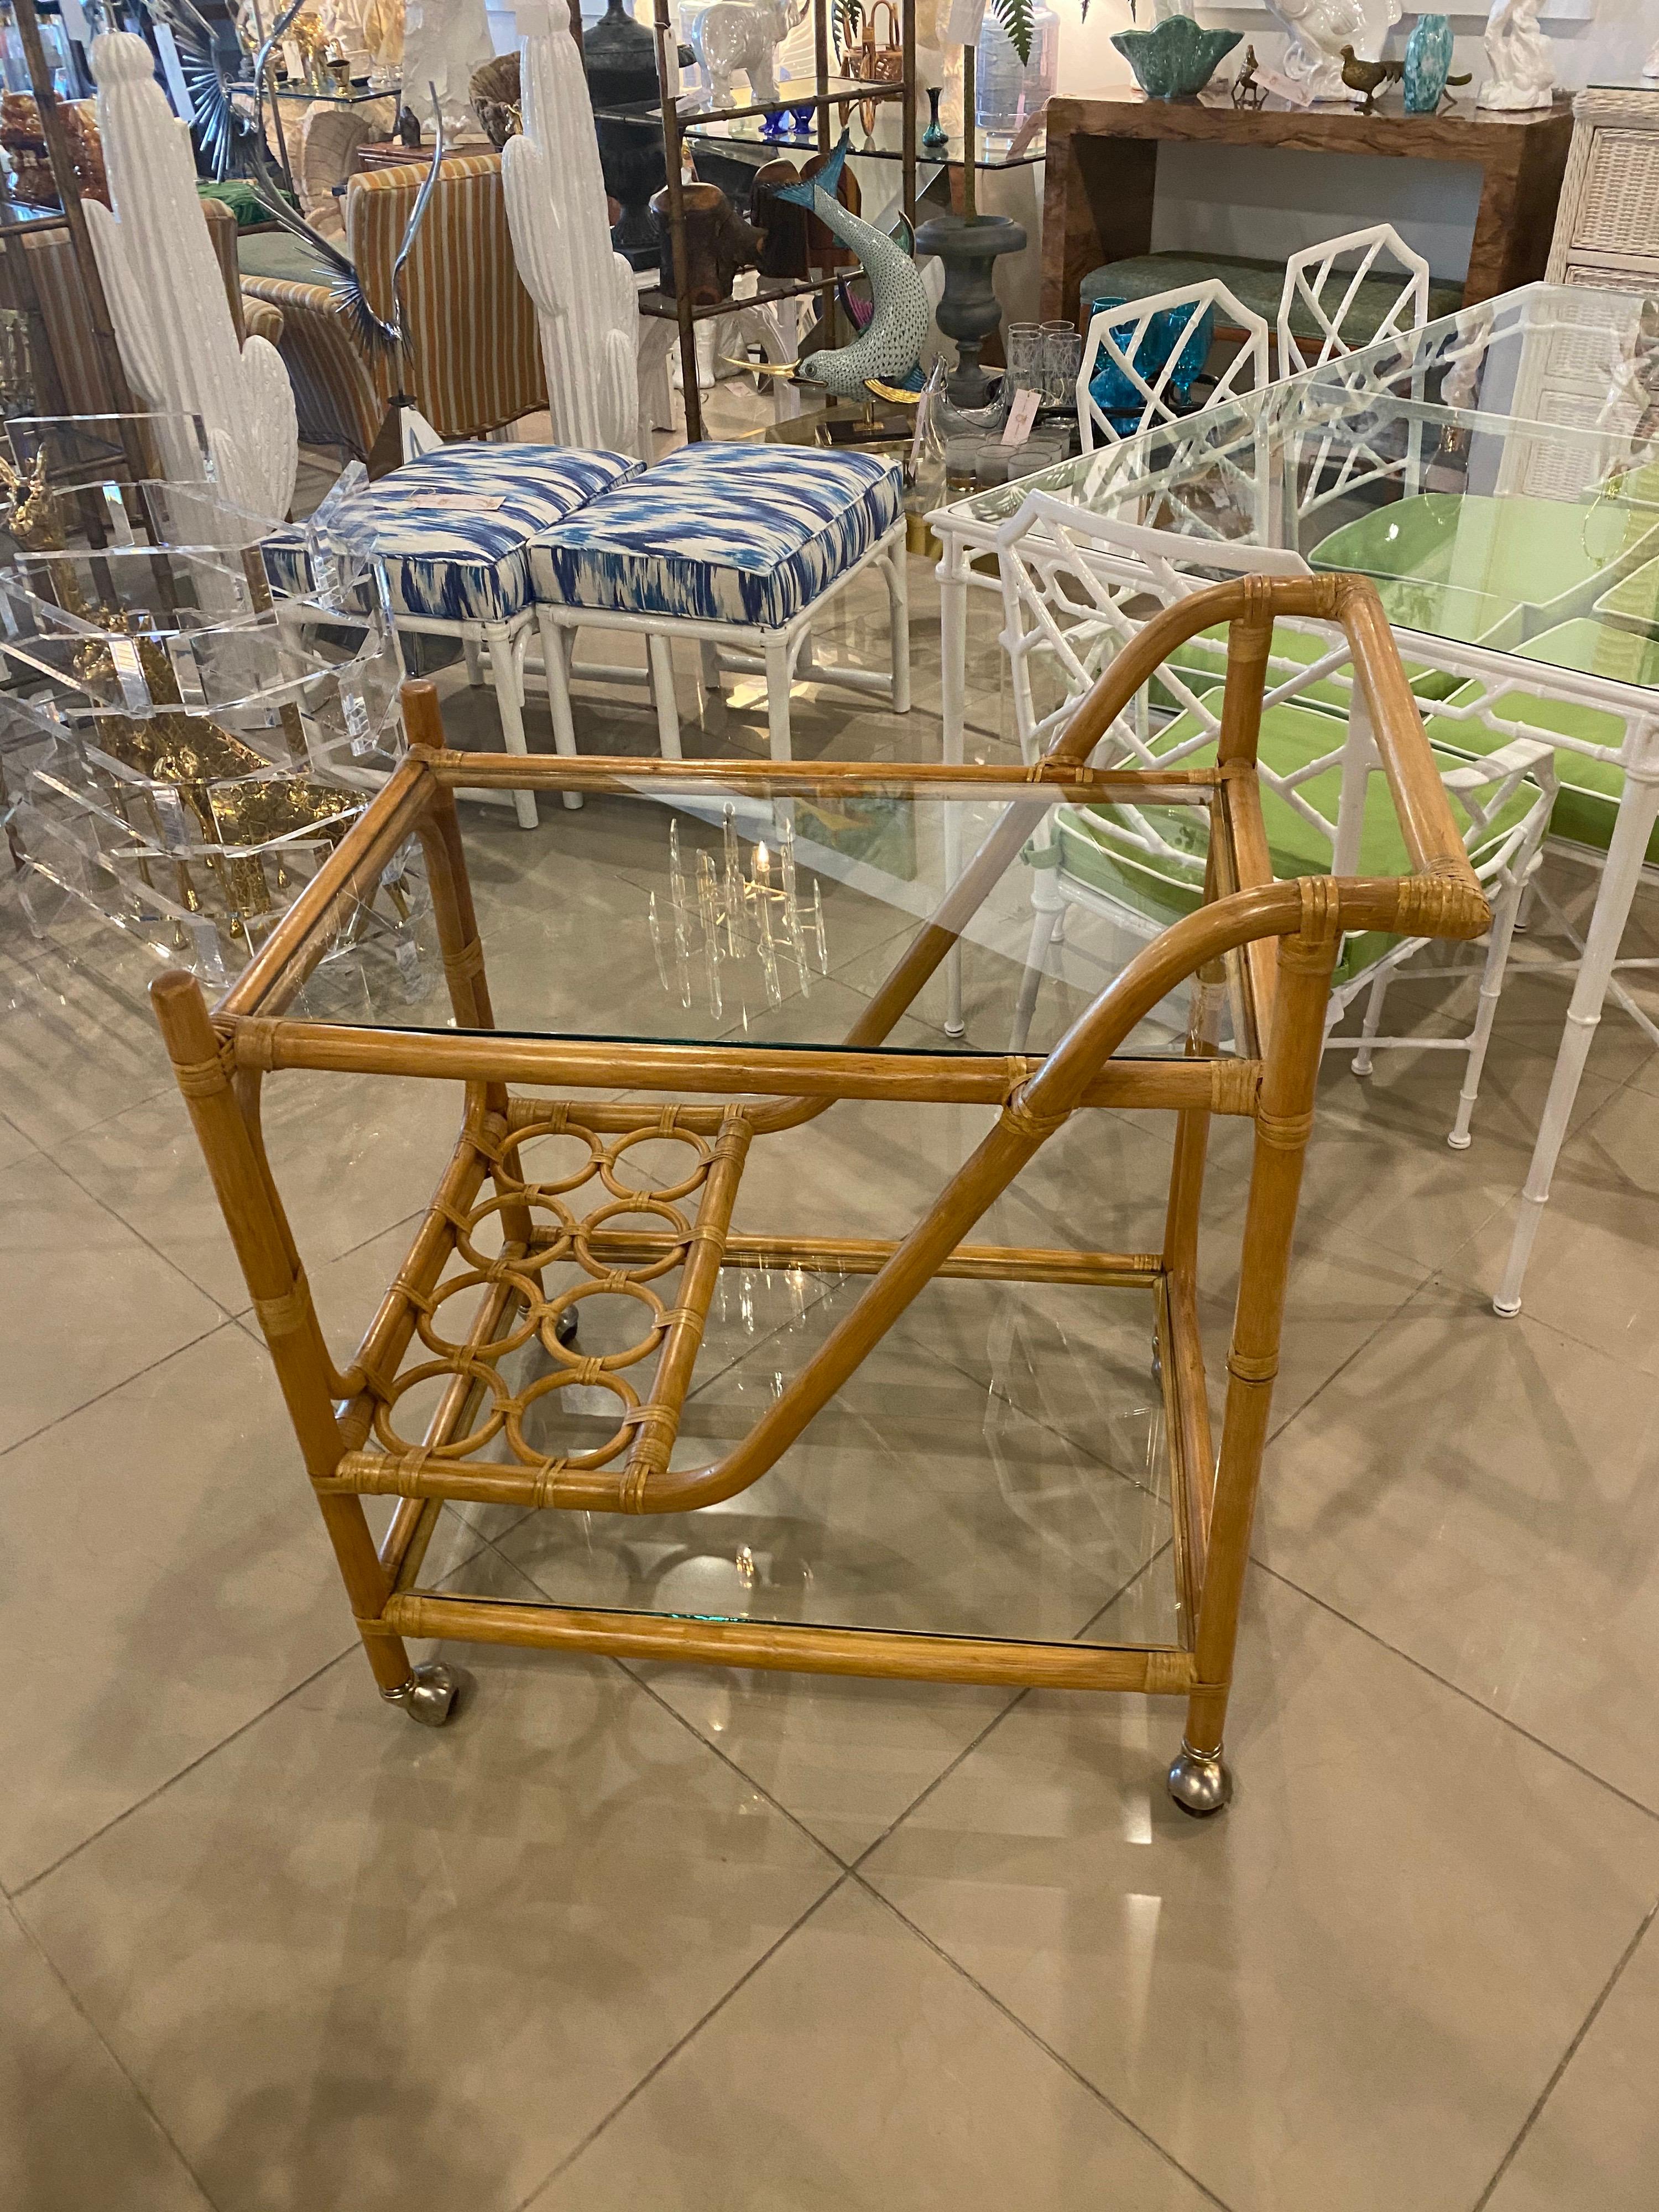 Lovely vintage rattan bar cart with chrome castor wheels and double glass shelves. I love that there's a place to hold wine bottles! New glass shelves.